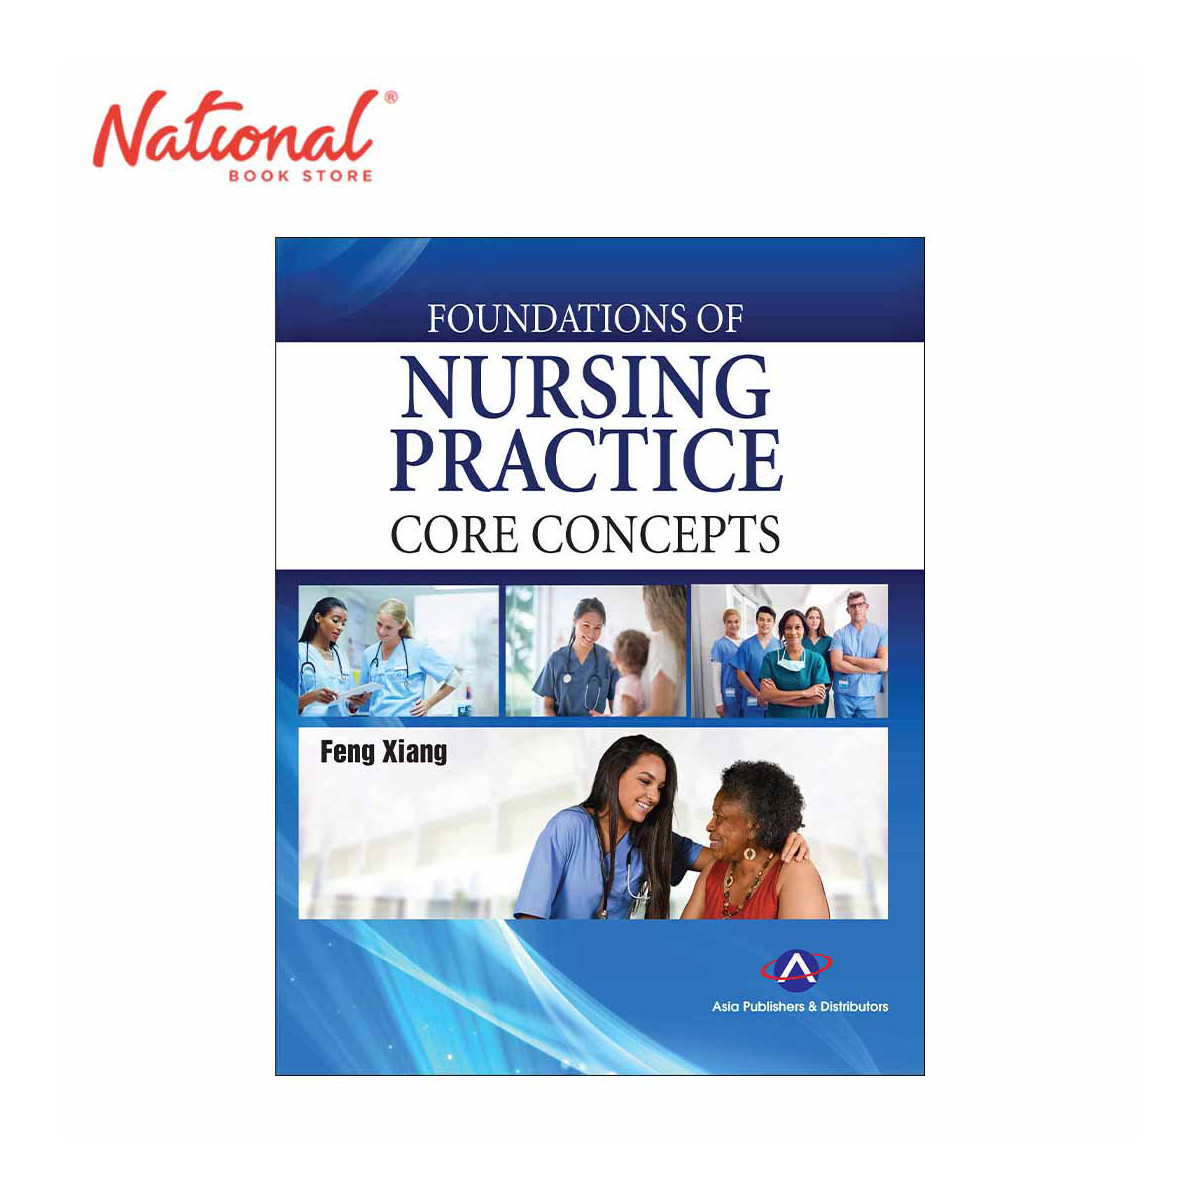 Foundations of Nursing Practice: Core Concepts by Feng Xiang - Trade Paperback - College Books